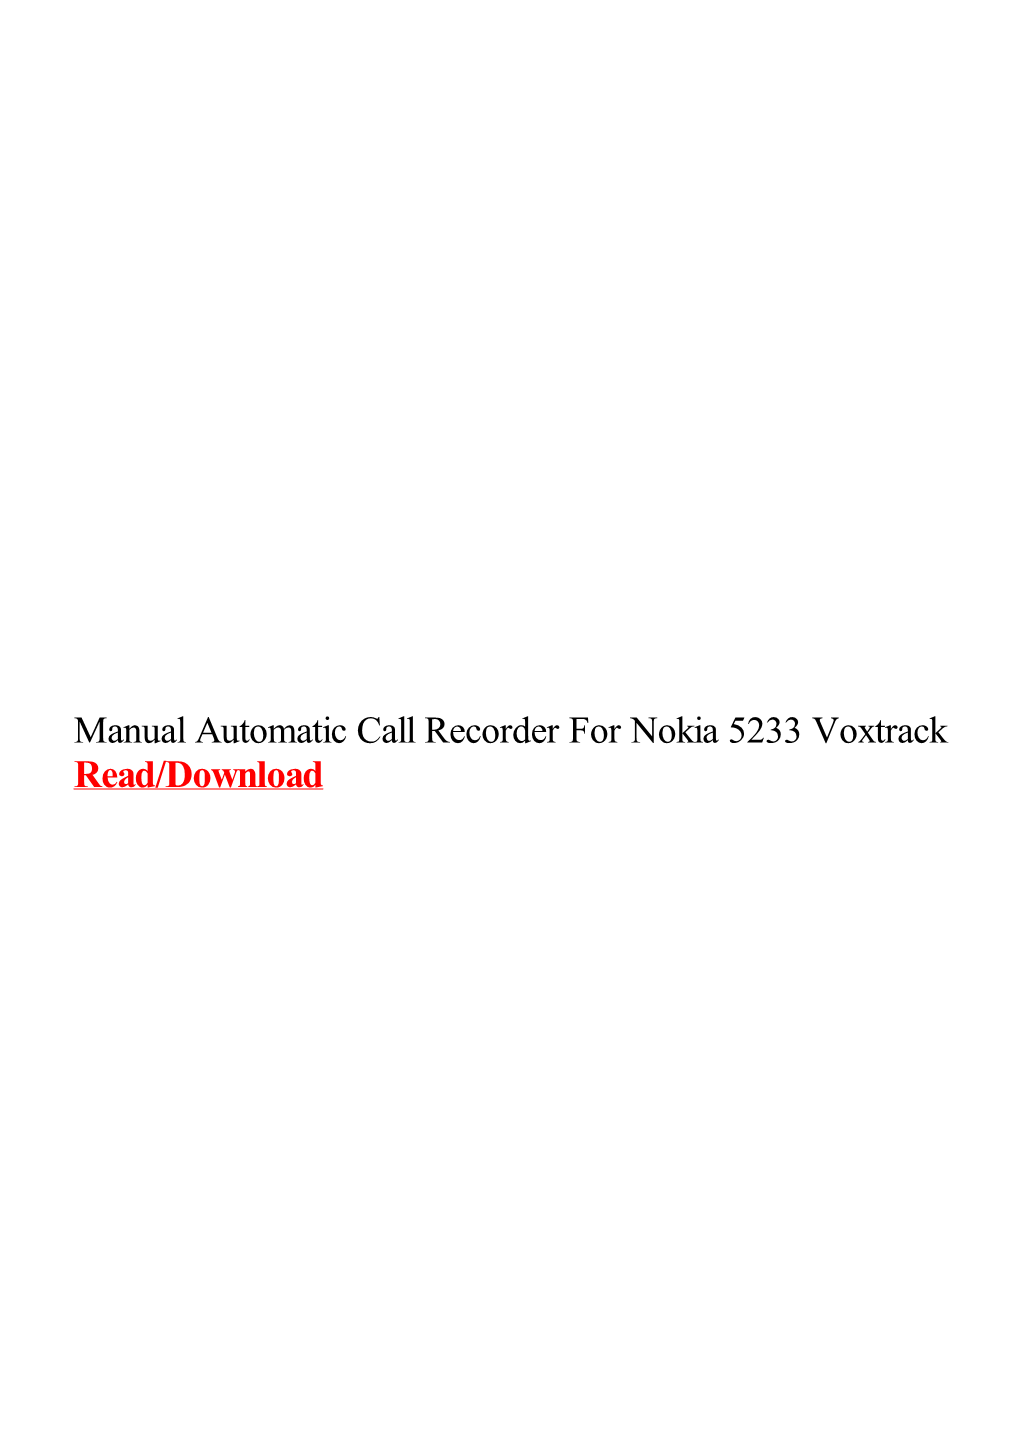 Manual Automatic Call Recorder for Nokia 5233 Voxtrack